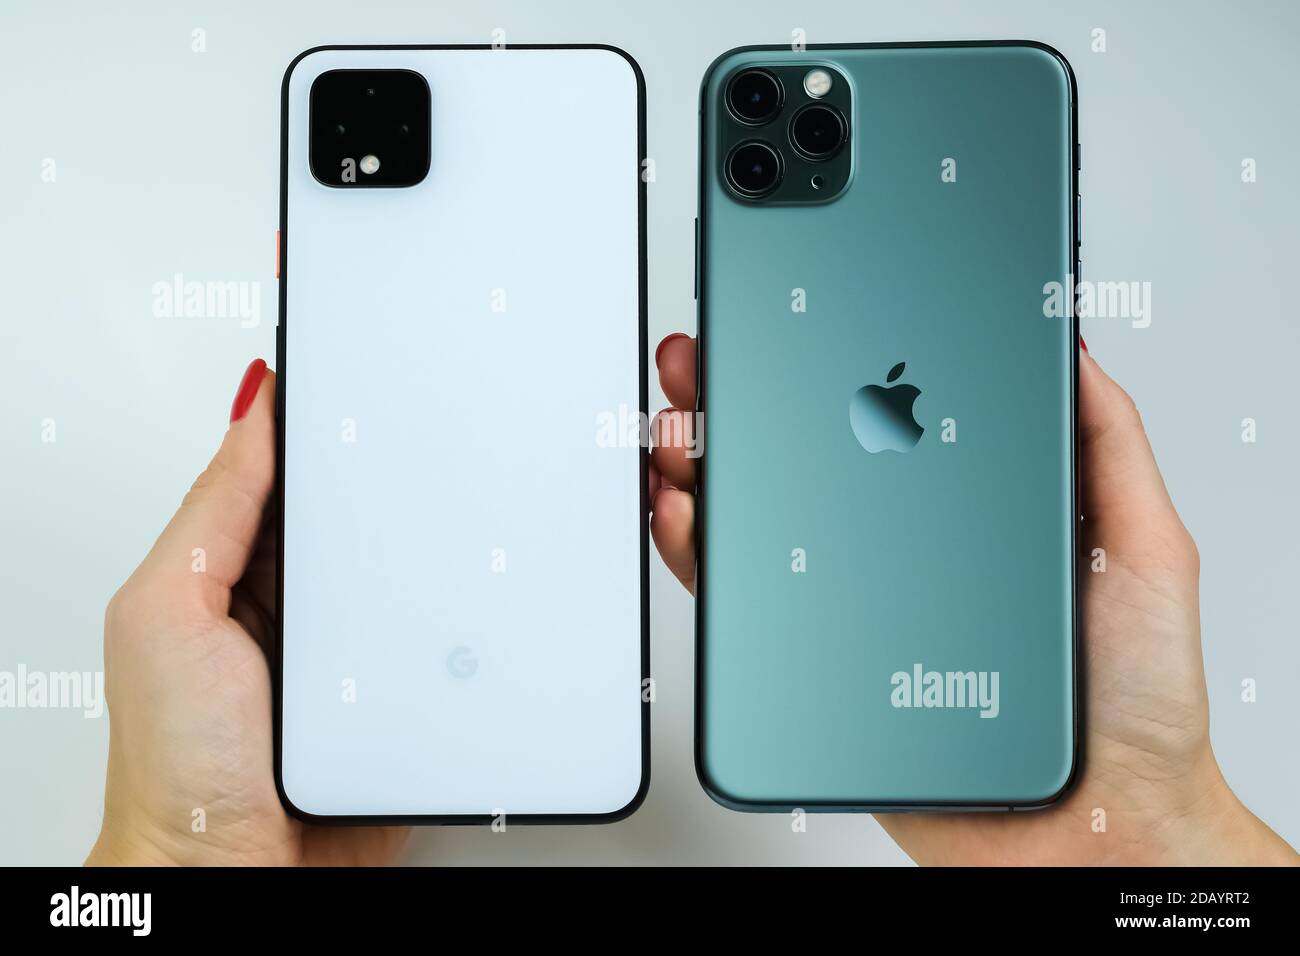 Google Pixel 4 Xl In Clearly White Color And Iphone 11 Pro Max In Midnight Green Stock Photo Alamy